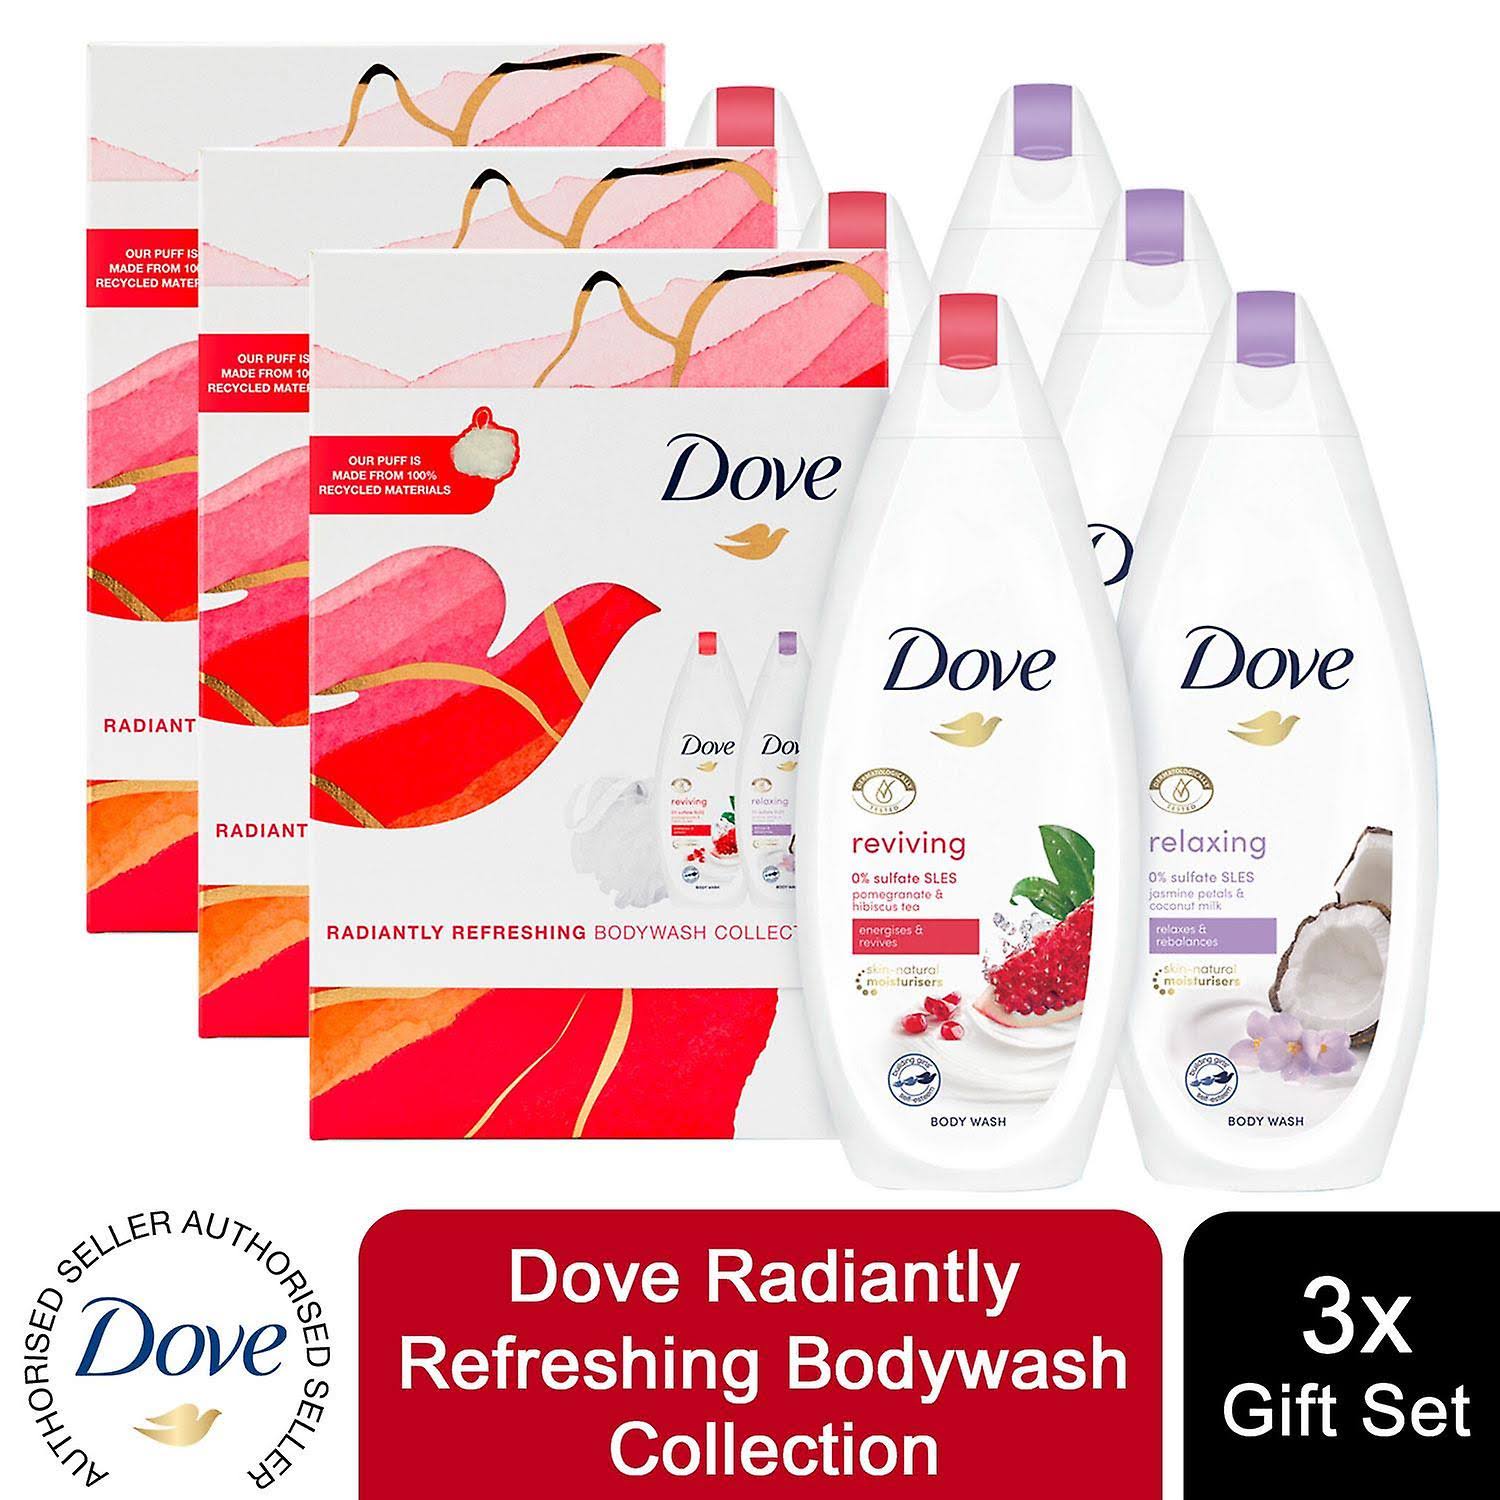 Dove Radiantly Refreshing Bodywash Collection Gift Set by dpharmacy